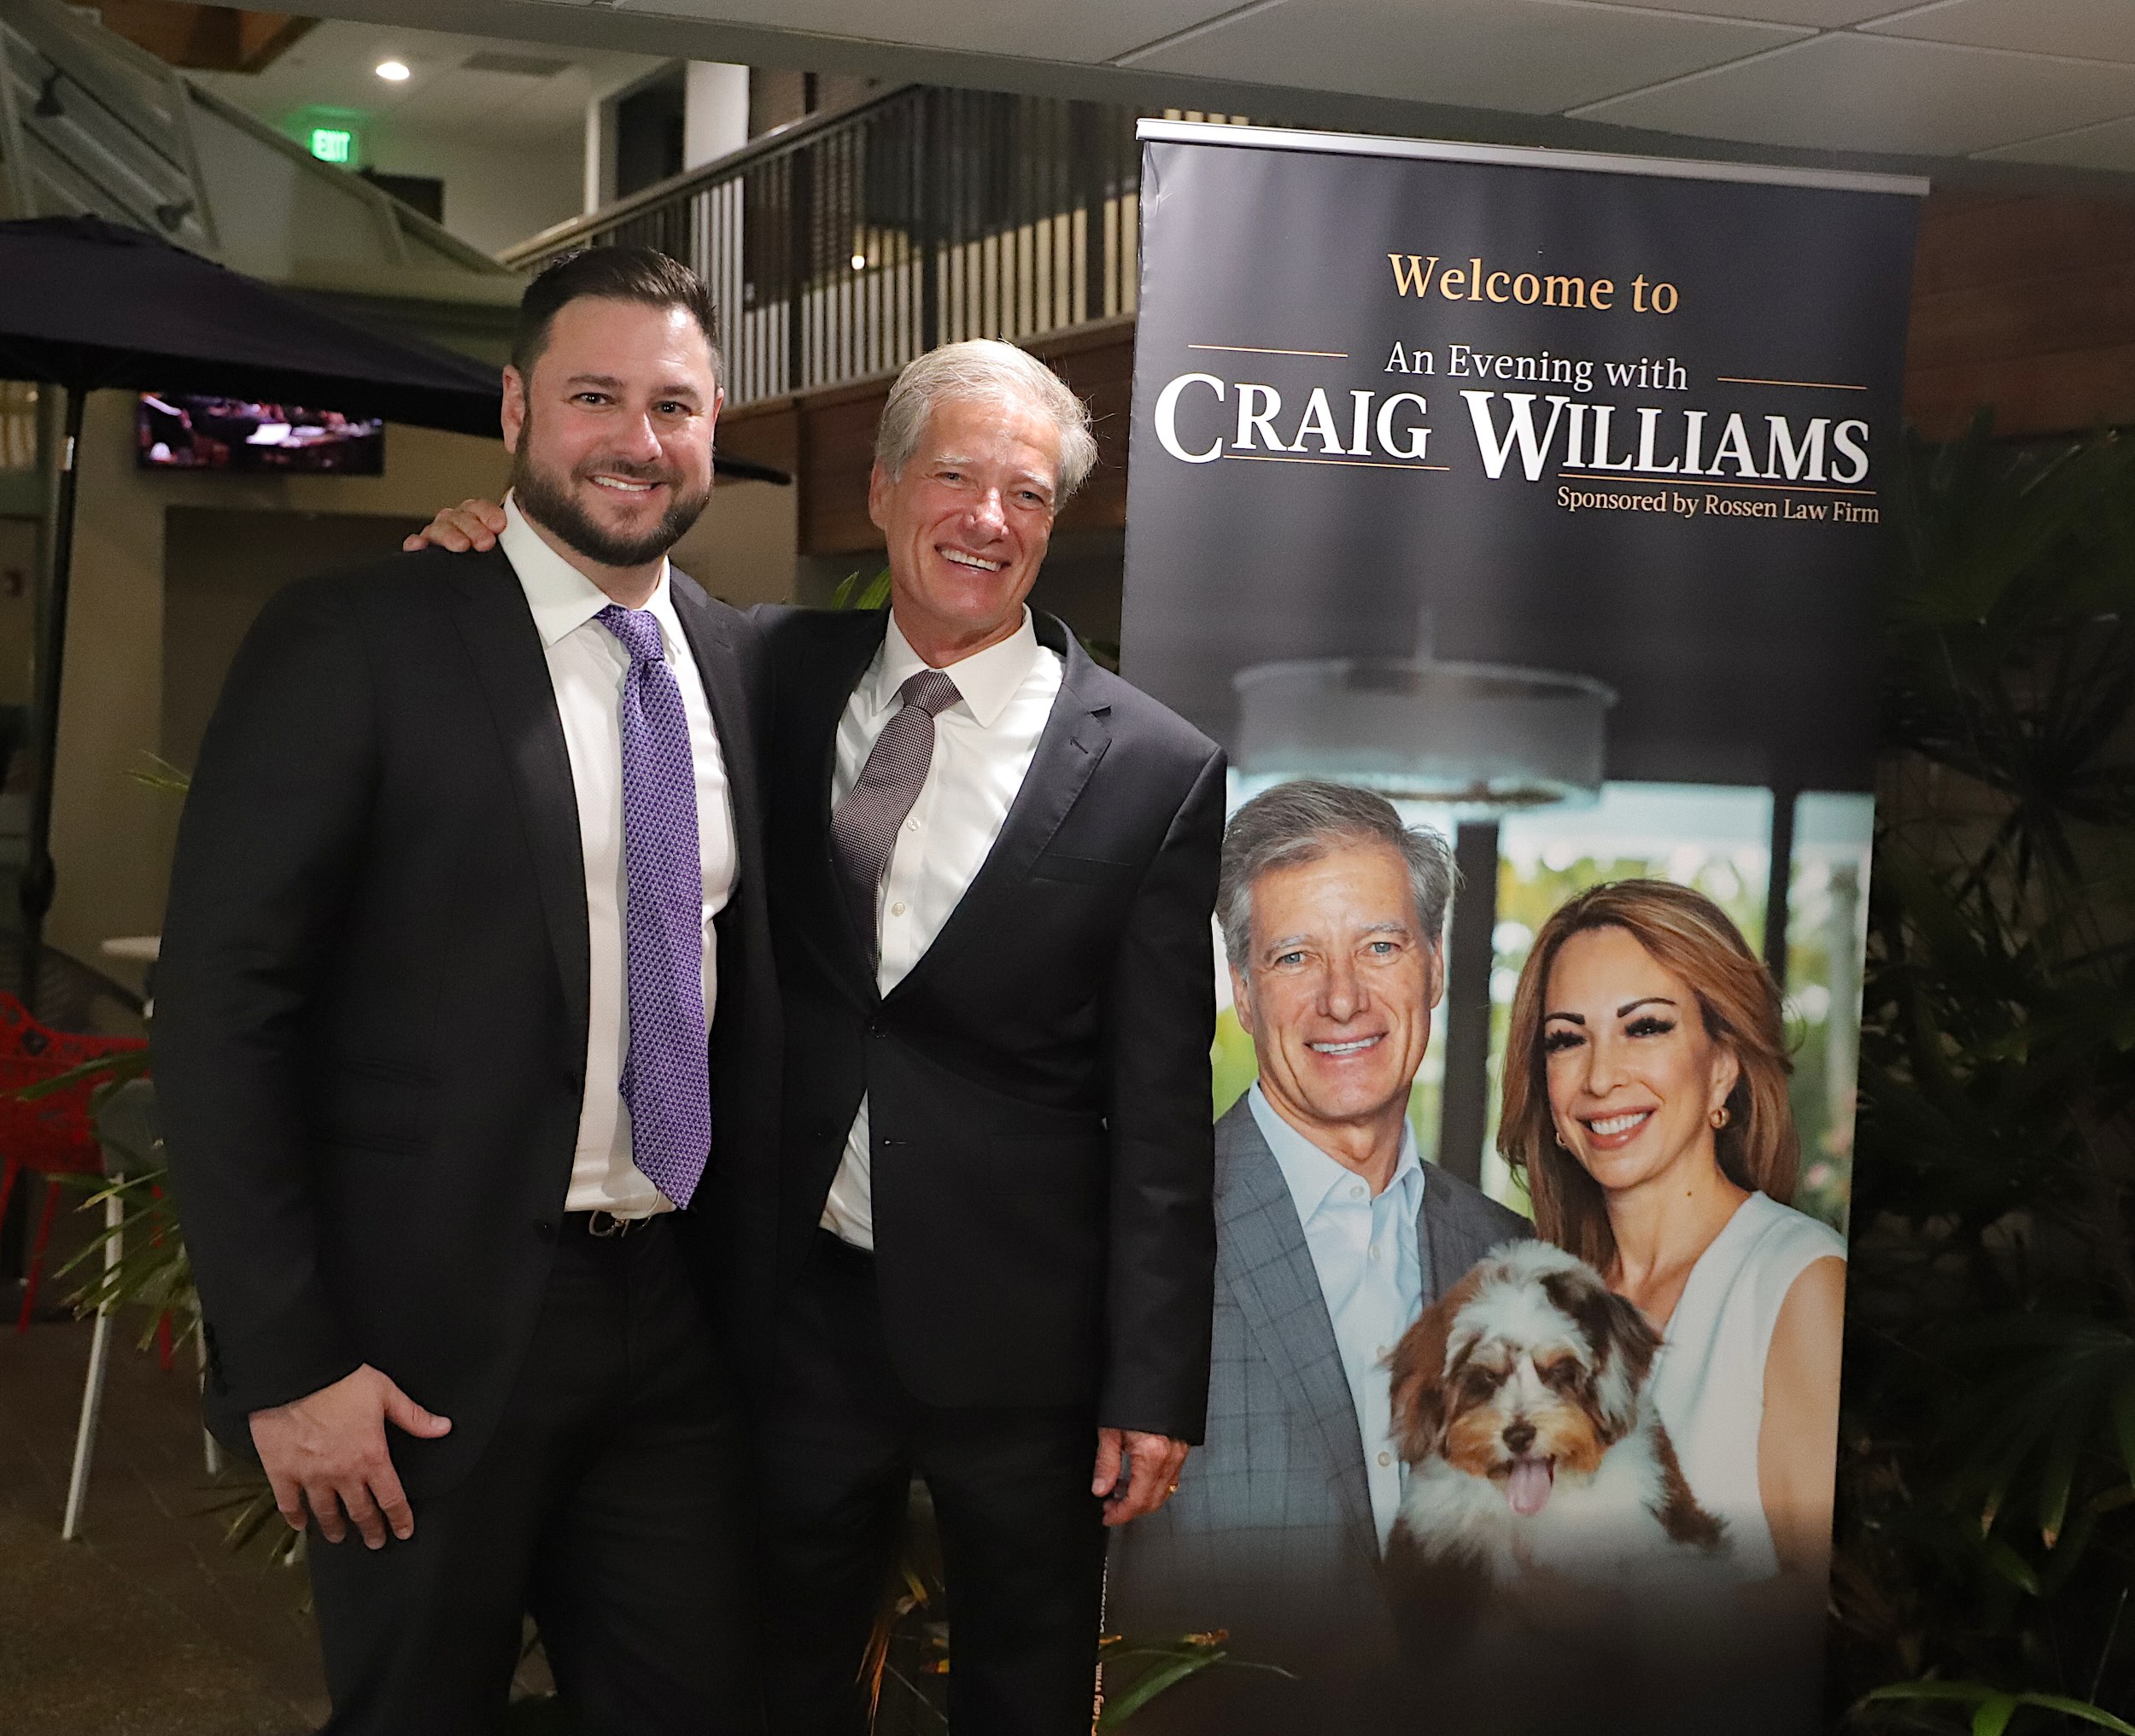 An Evening with Craig Williams